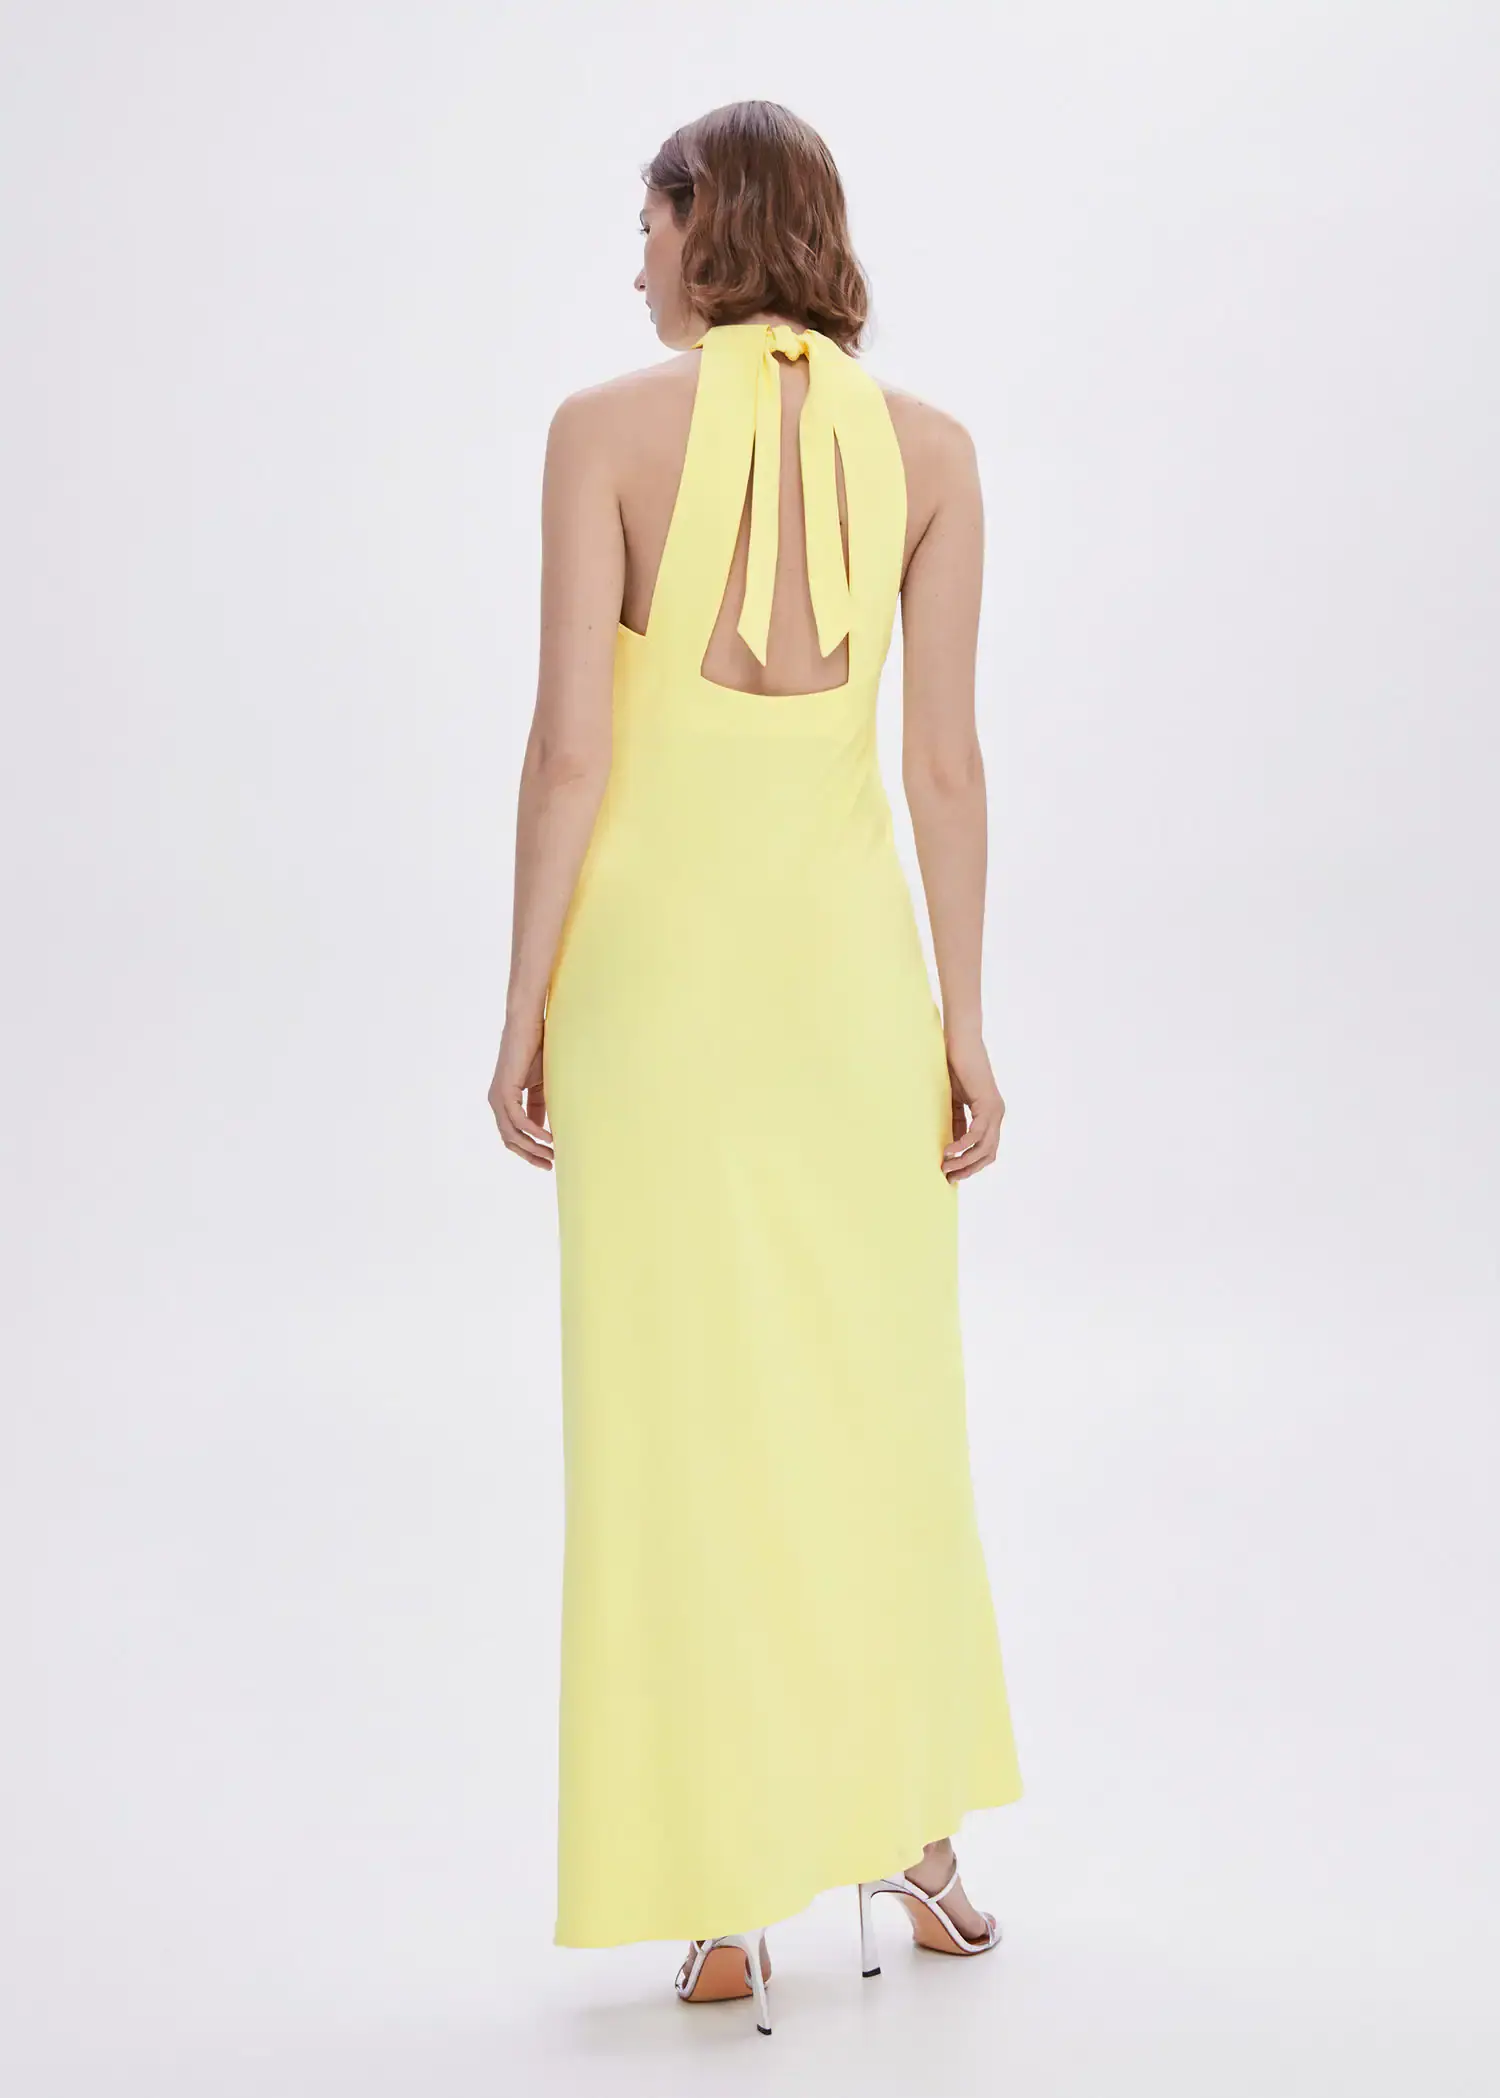 Mango Halter-neck open-back dress. a woman wearing a yellow dress standing in front of a white wall. 